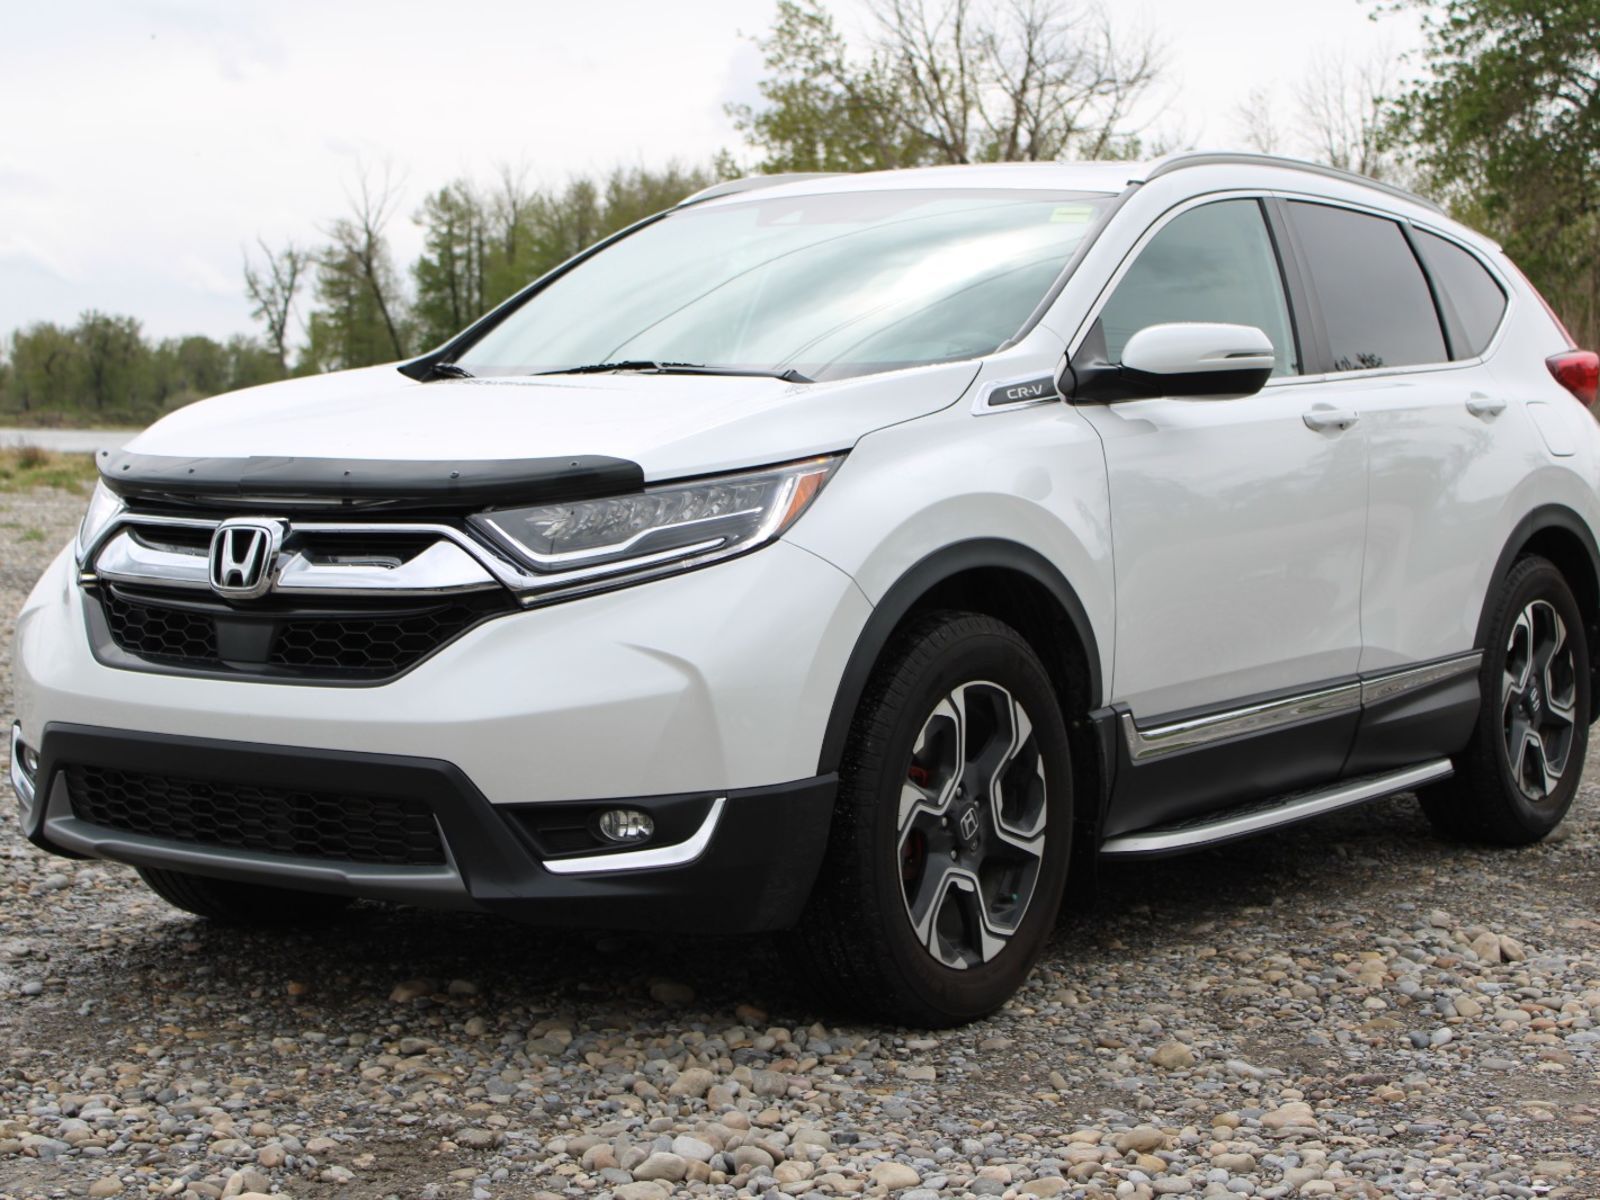 2019 Honda CR-V TOURING MODEL - NEW FRONT BRAKES, WIPERS AND SERVI